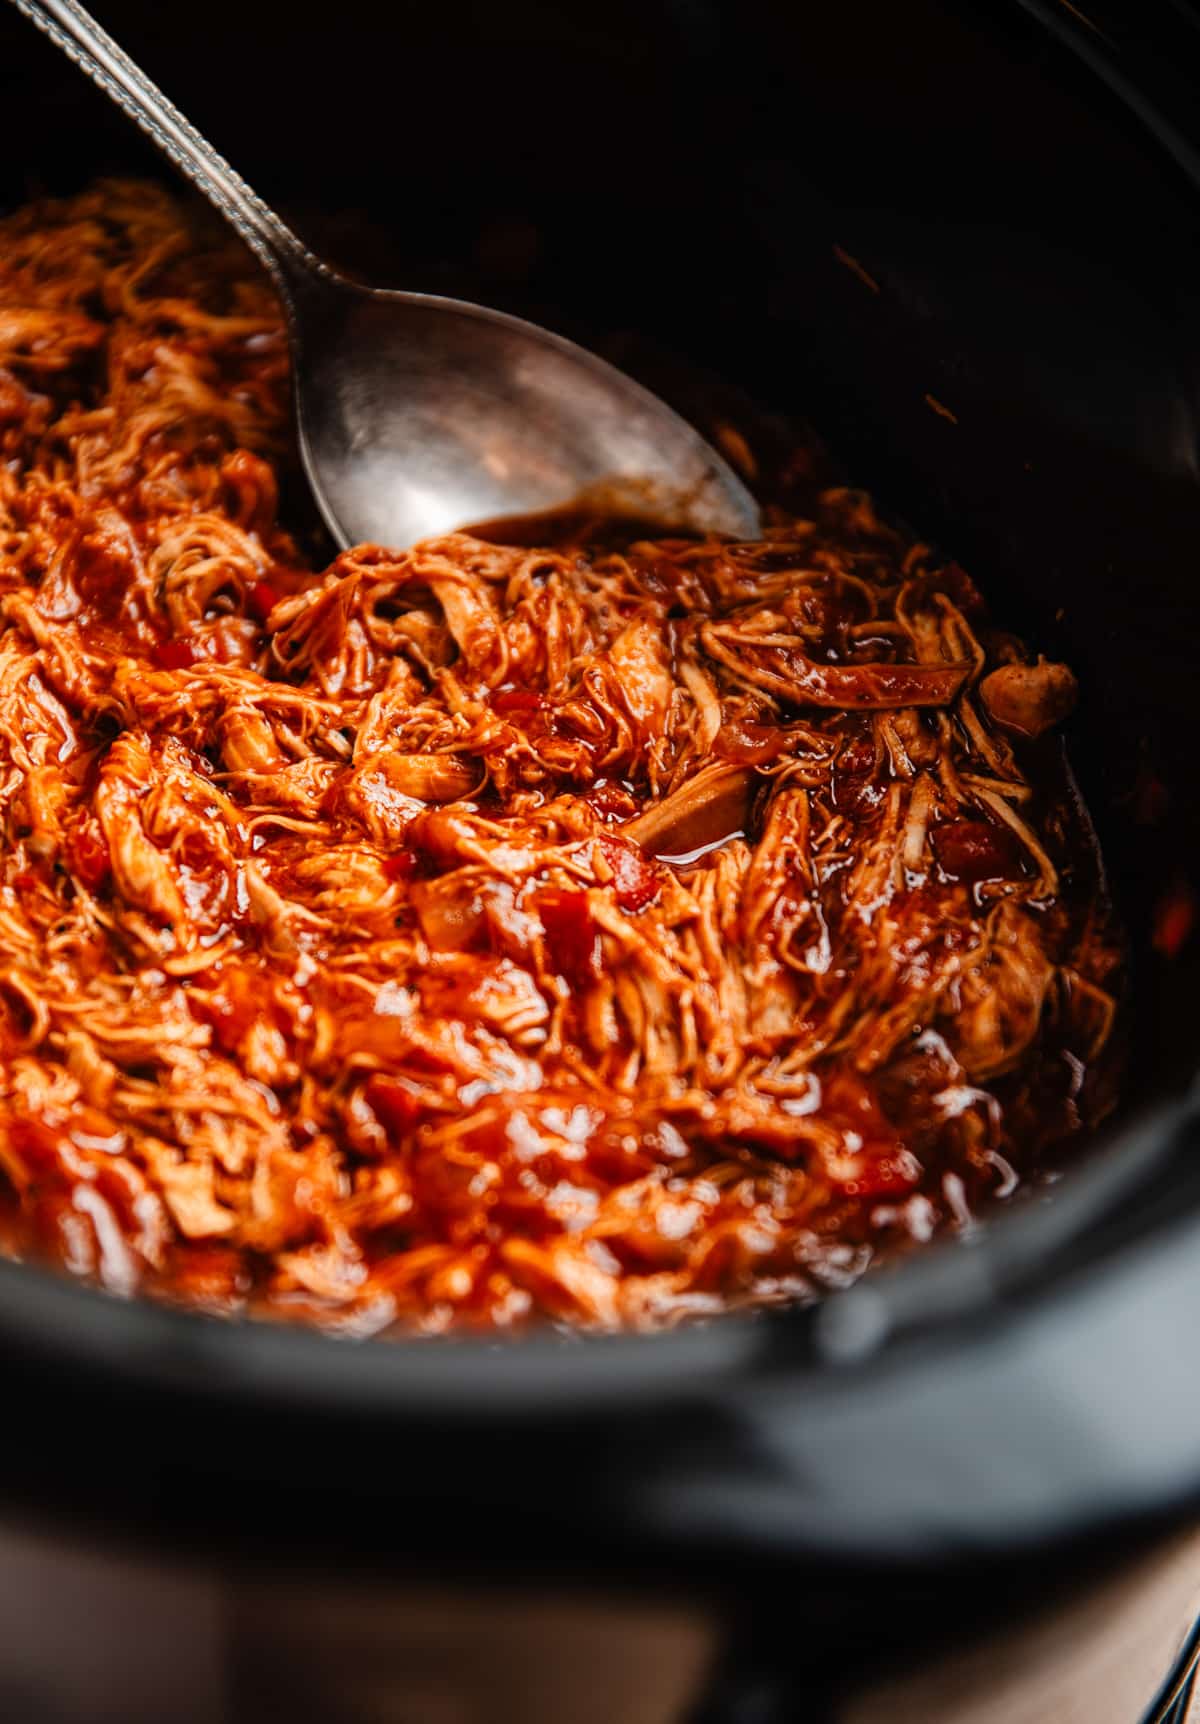 Crock pot with shredded BBQ chicken prepared and serving spoon scooping into it.